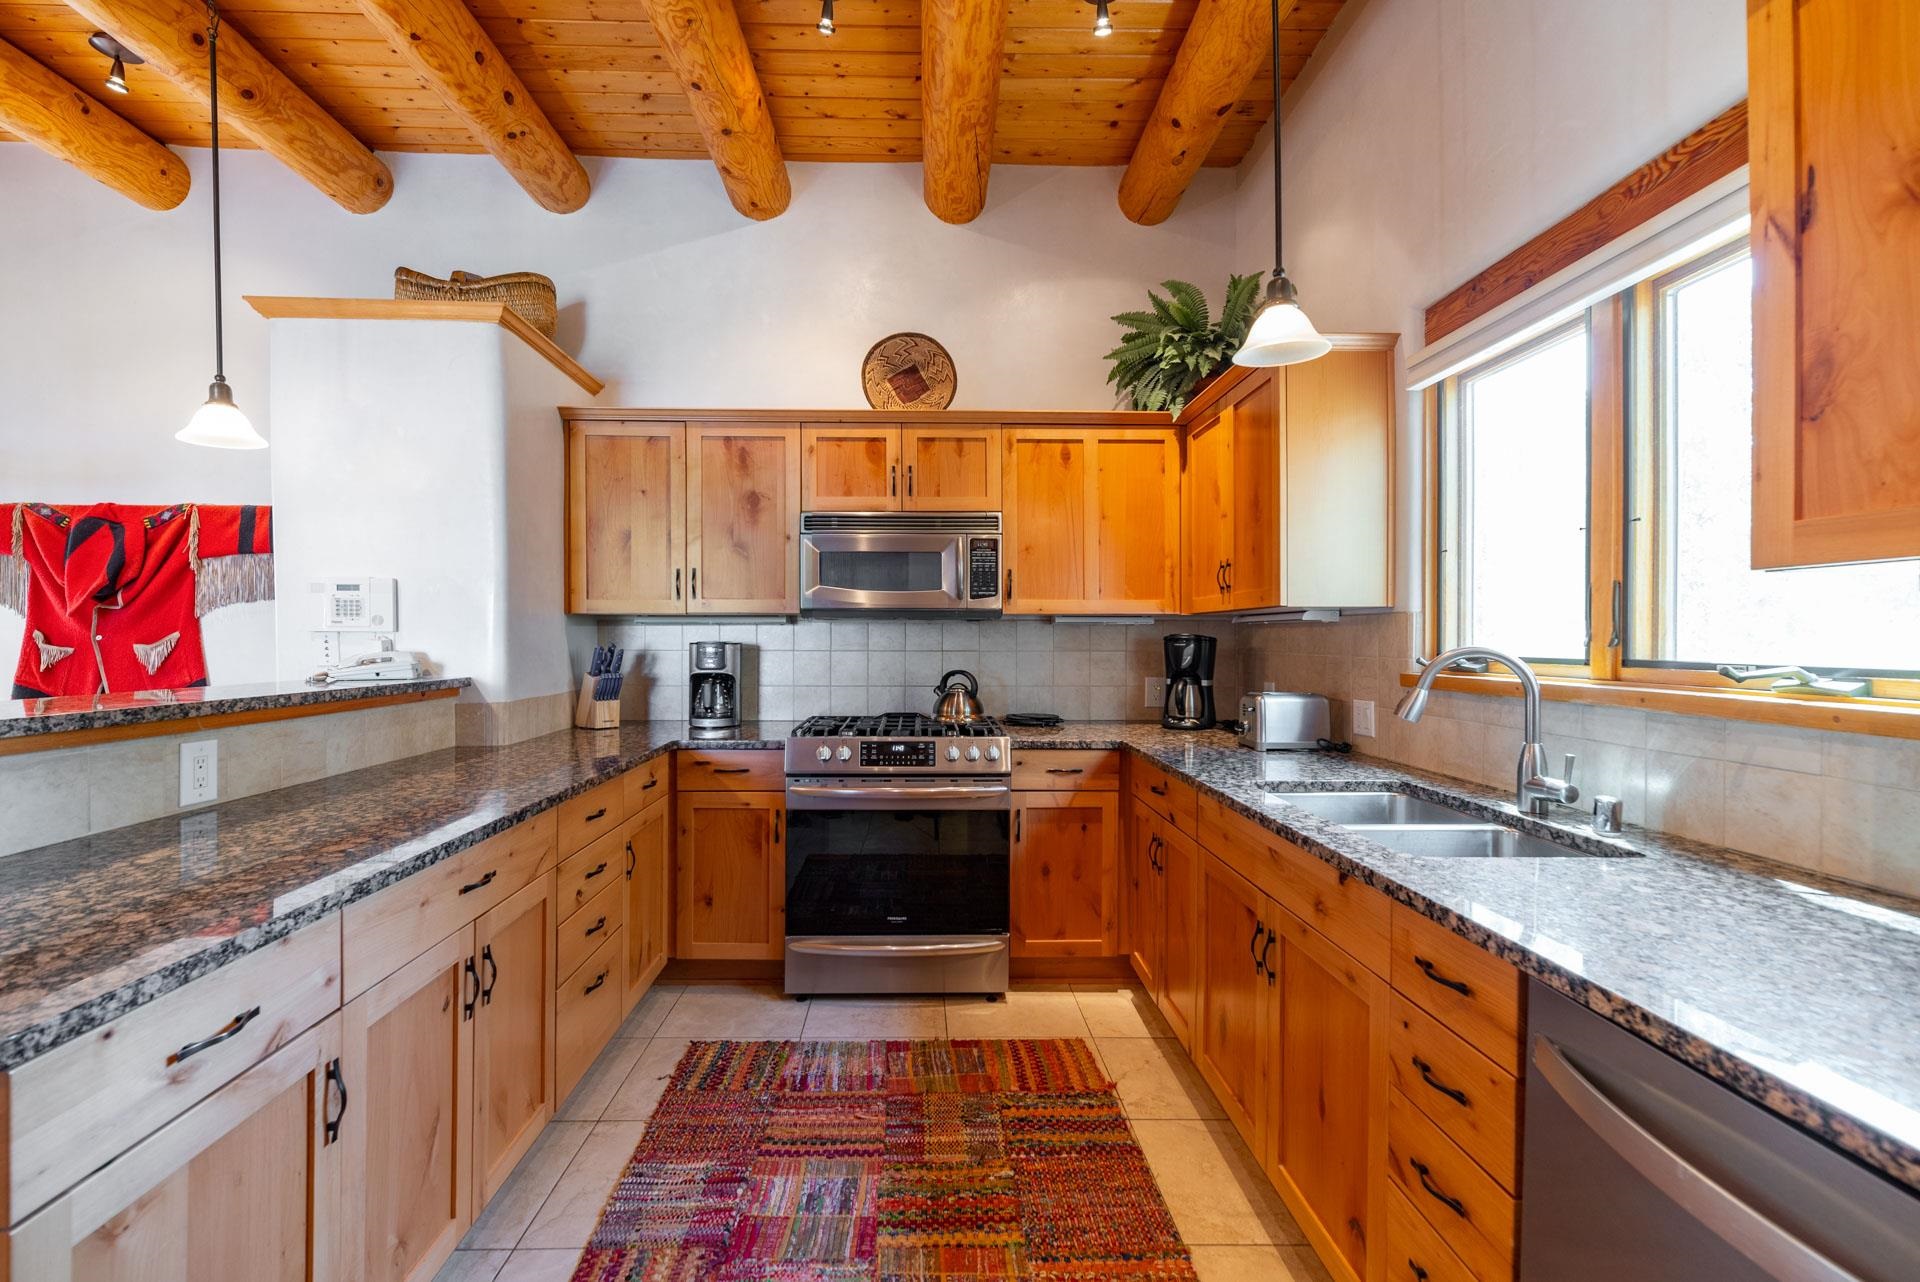 38 LODGE 38 M, Santa Fe, New Mexico 87506, 2 Bedrooms Bedrooms, ,2 BathroomsBathrooms,Residential,For Sale,38 LODGE 38 M,202201375